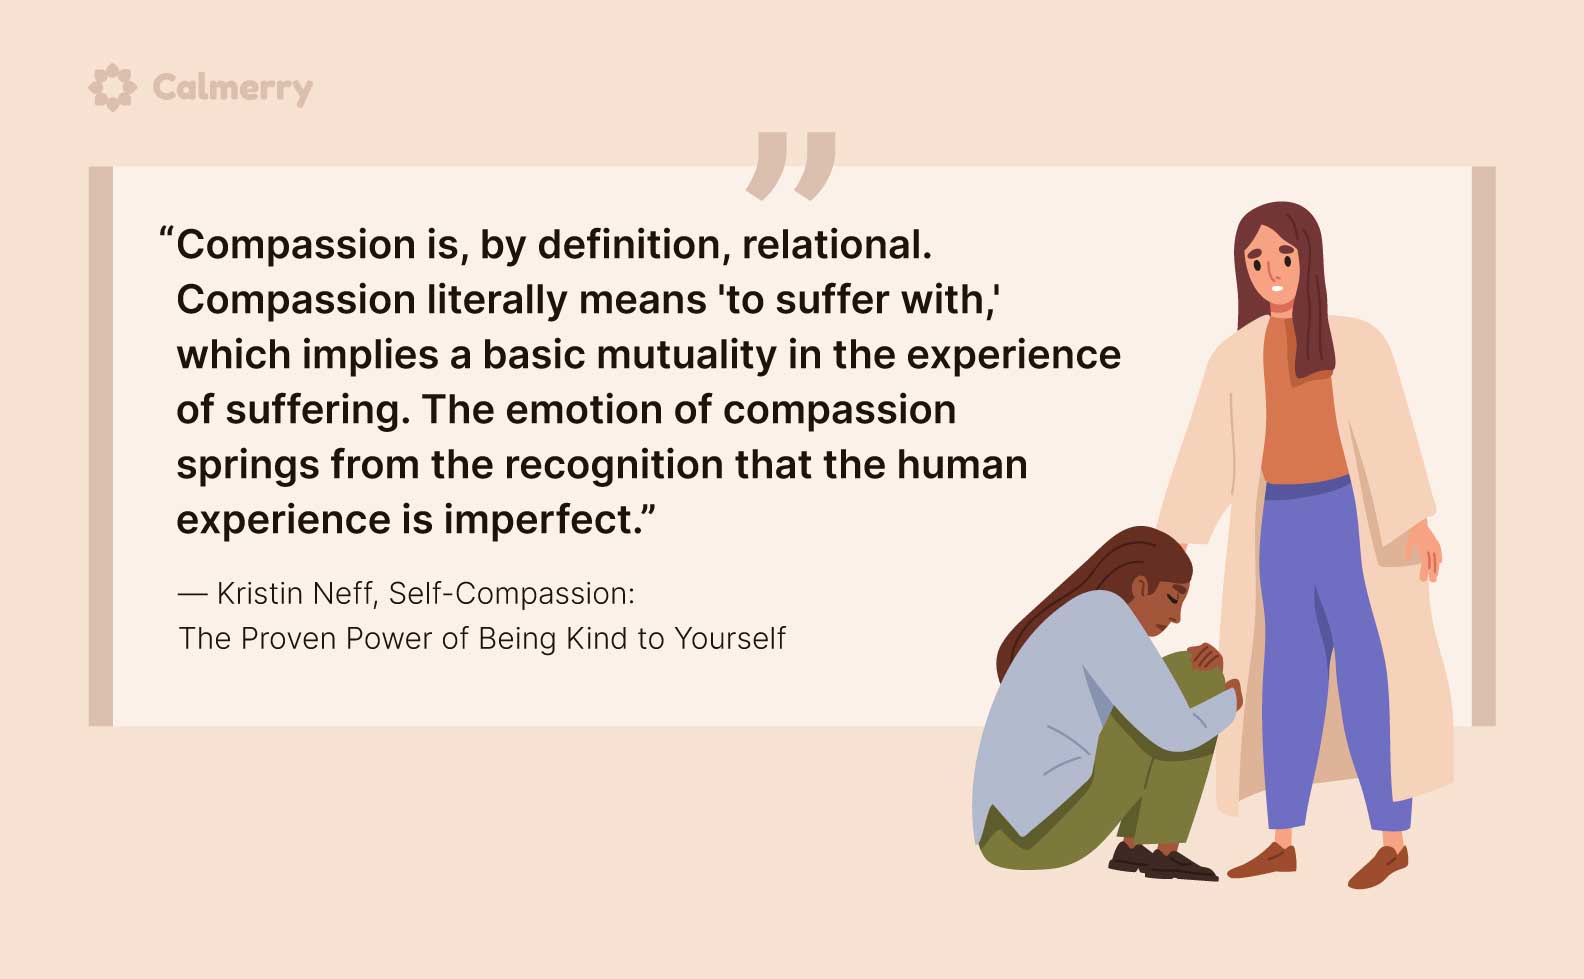 Self-Compassion The Proven Power of Being Kind to Yourself